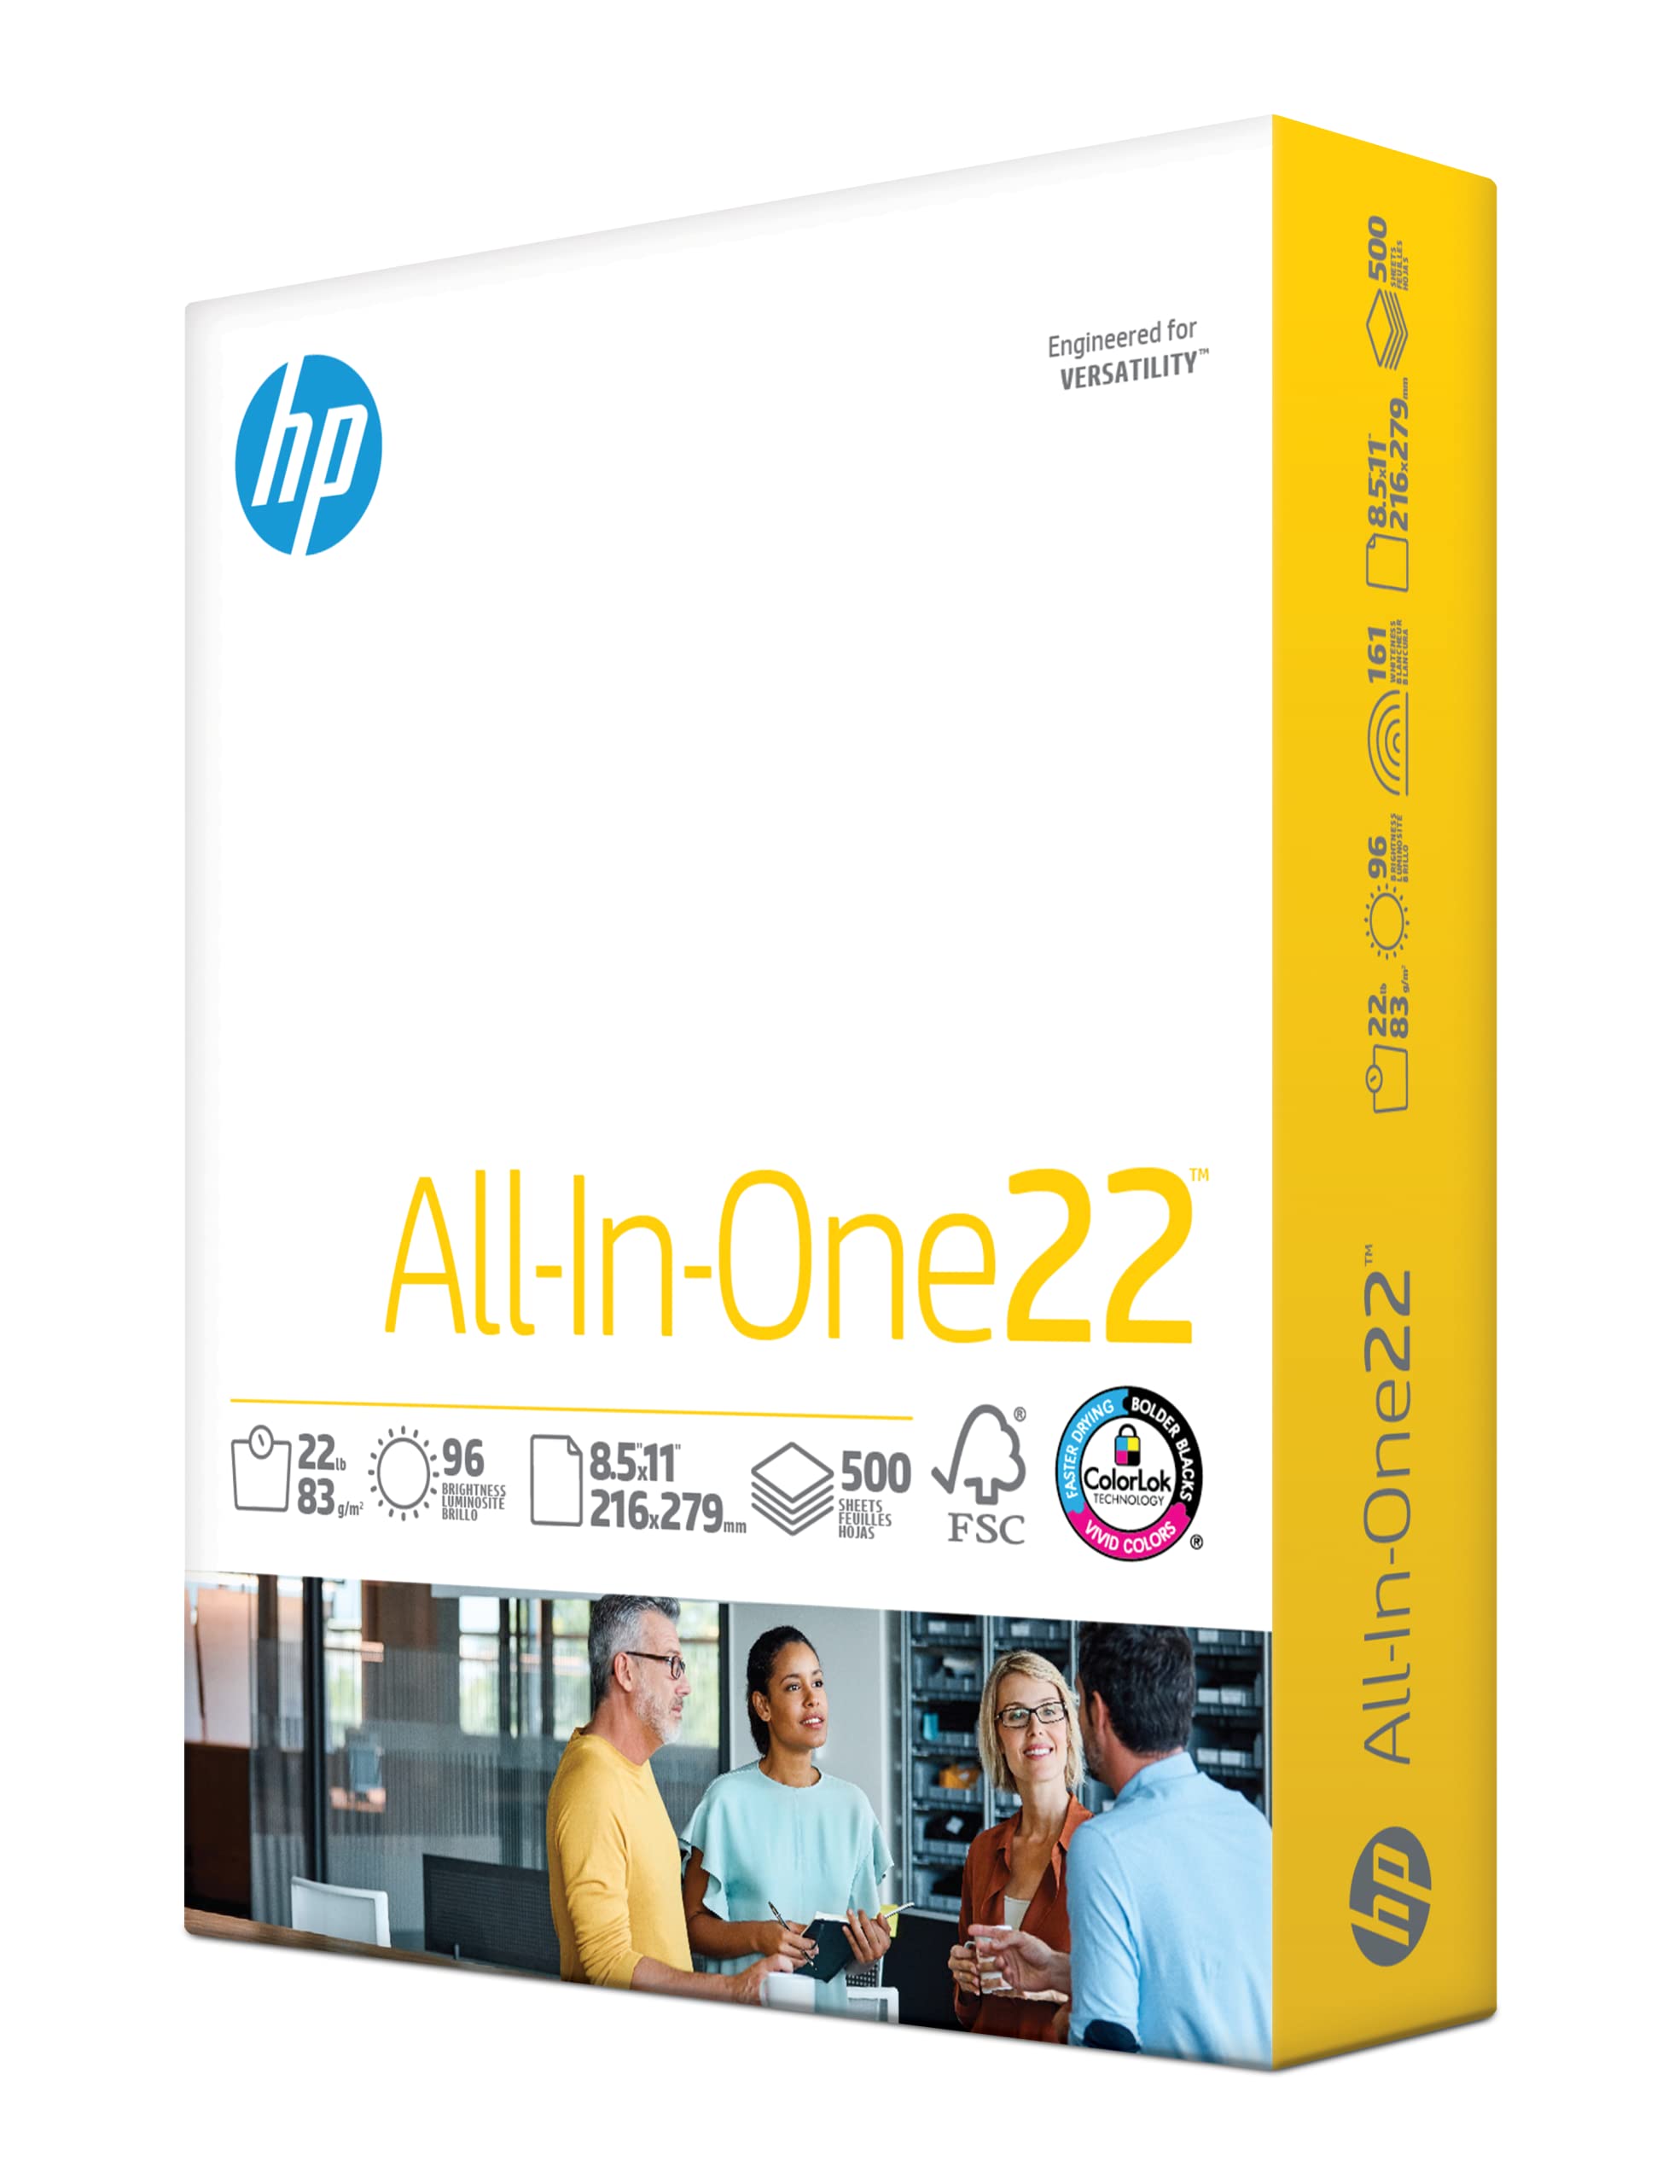 HP Papers HP Printer Paper | 8.5 x 11 Paper | All In On...